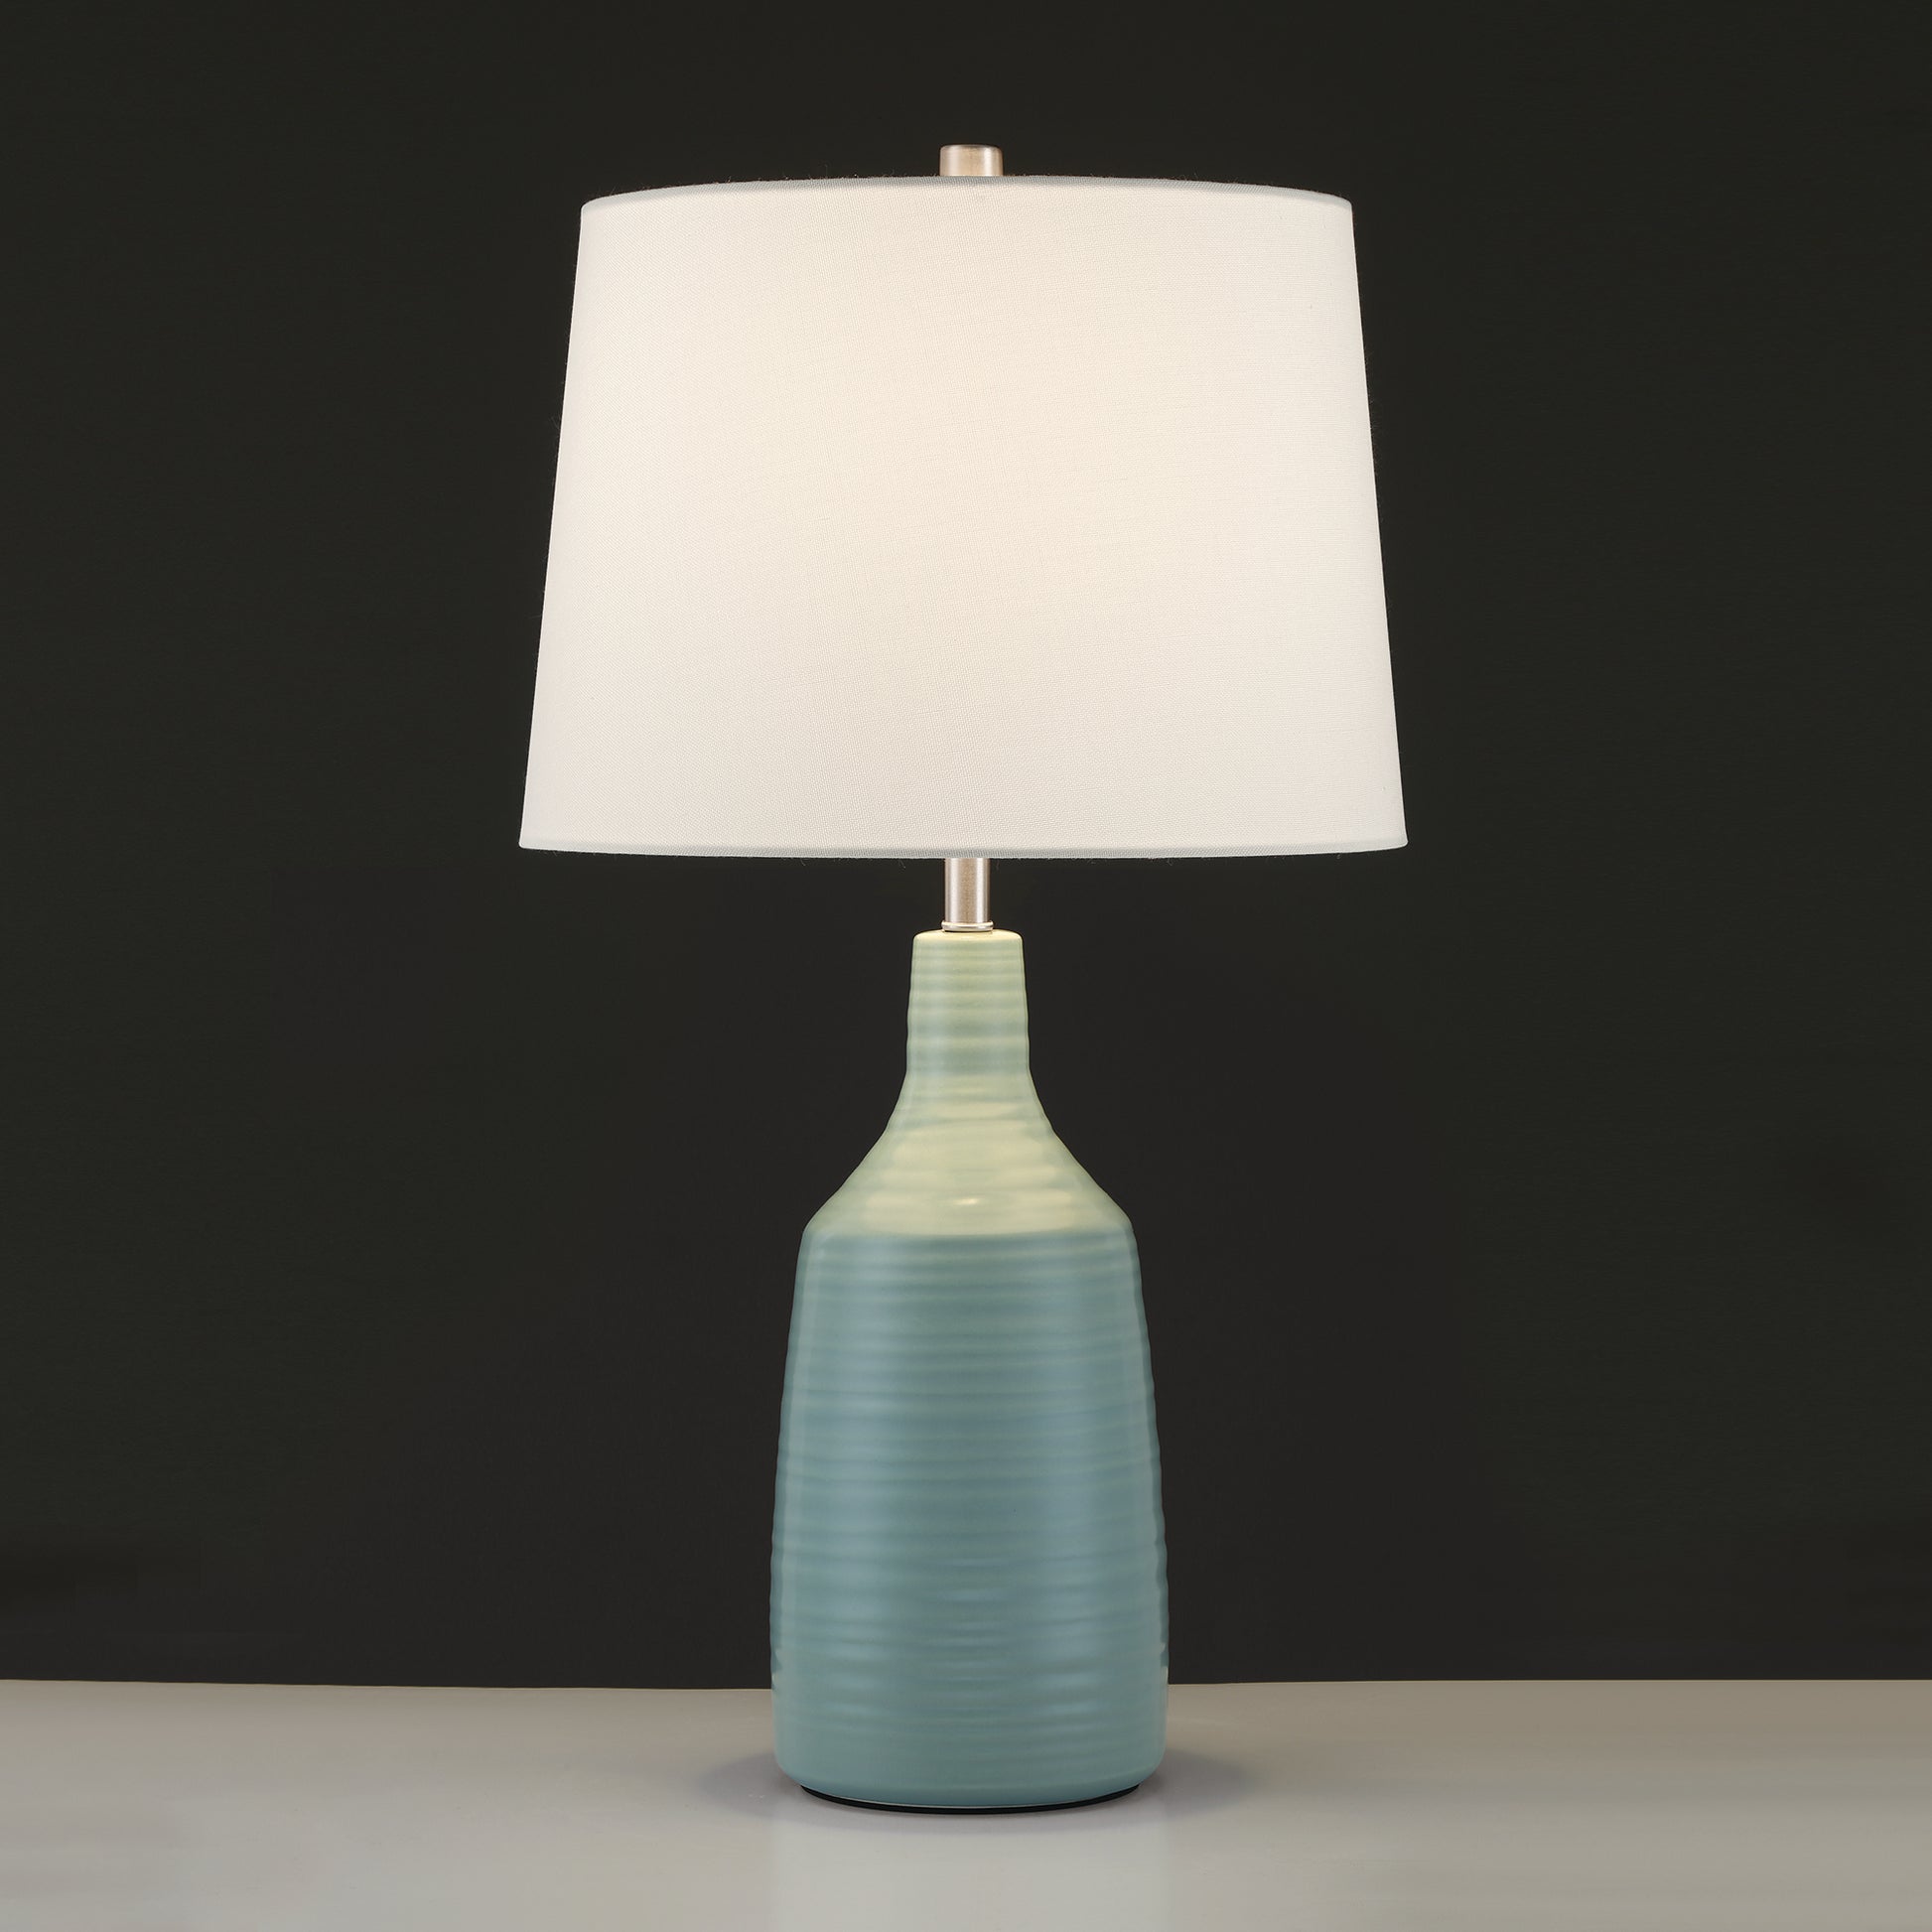 1 light cyan ceramic table lamp set of 2 (5) by ACROMA